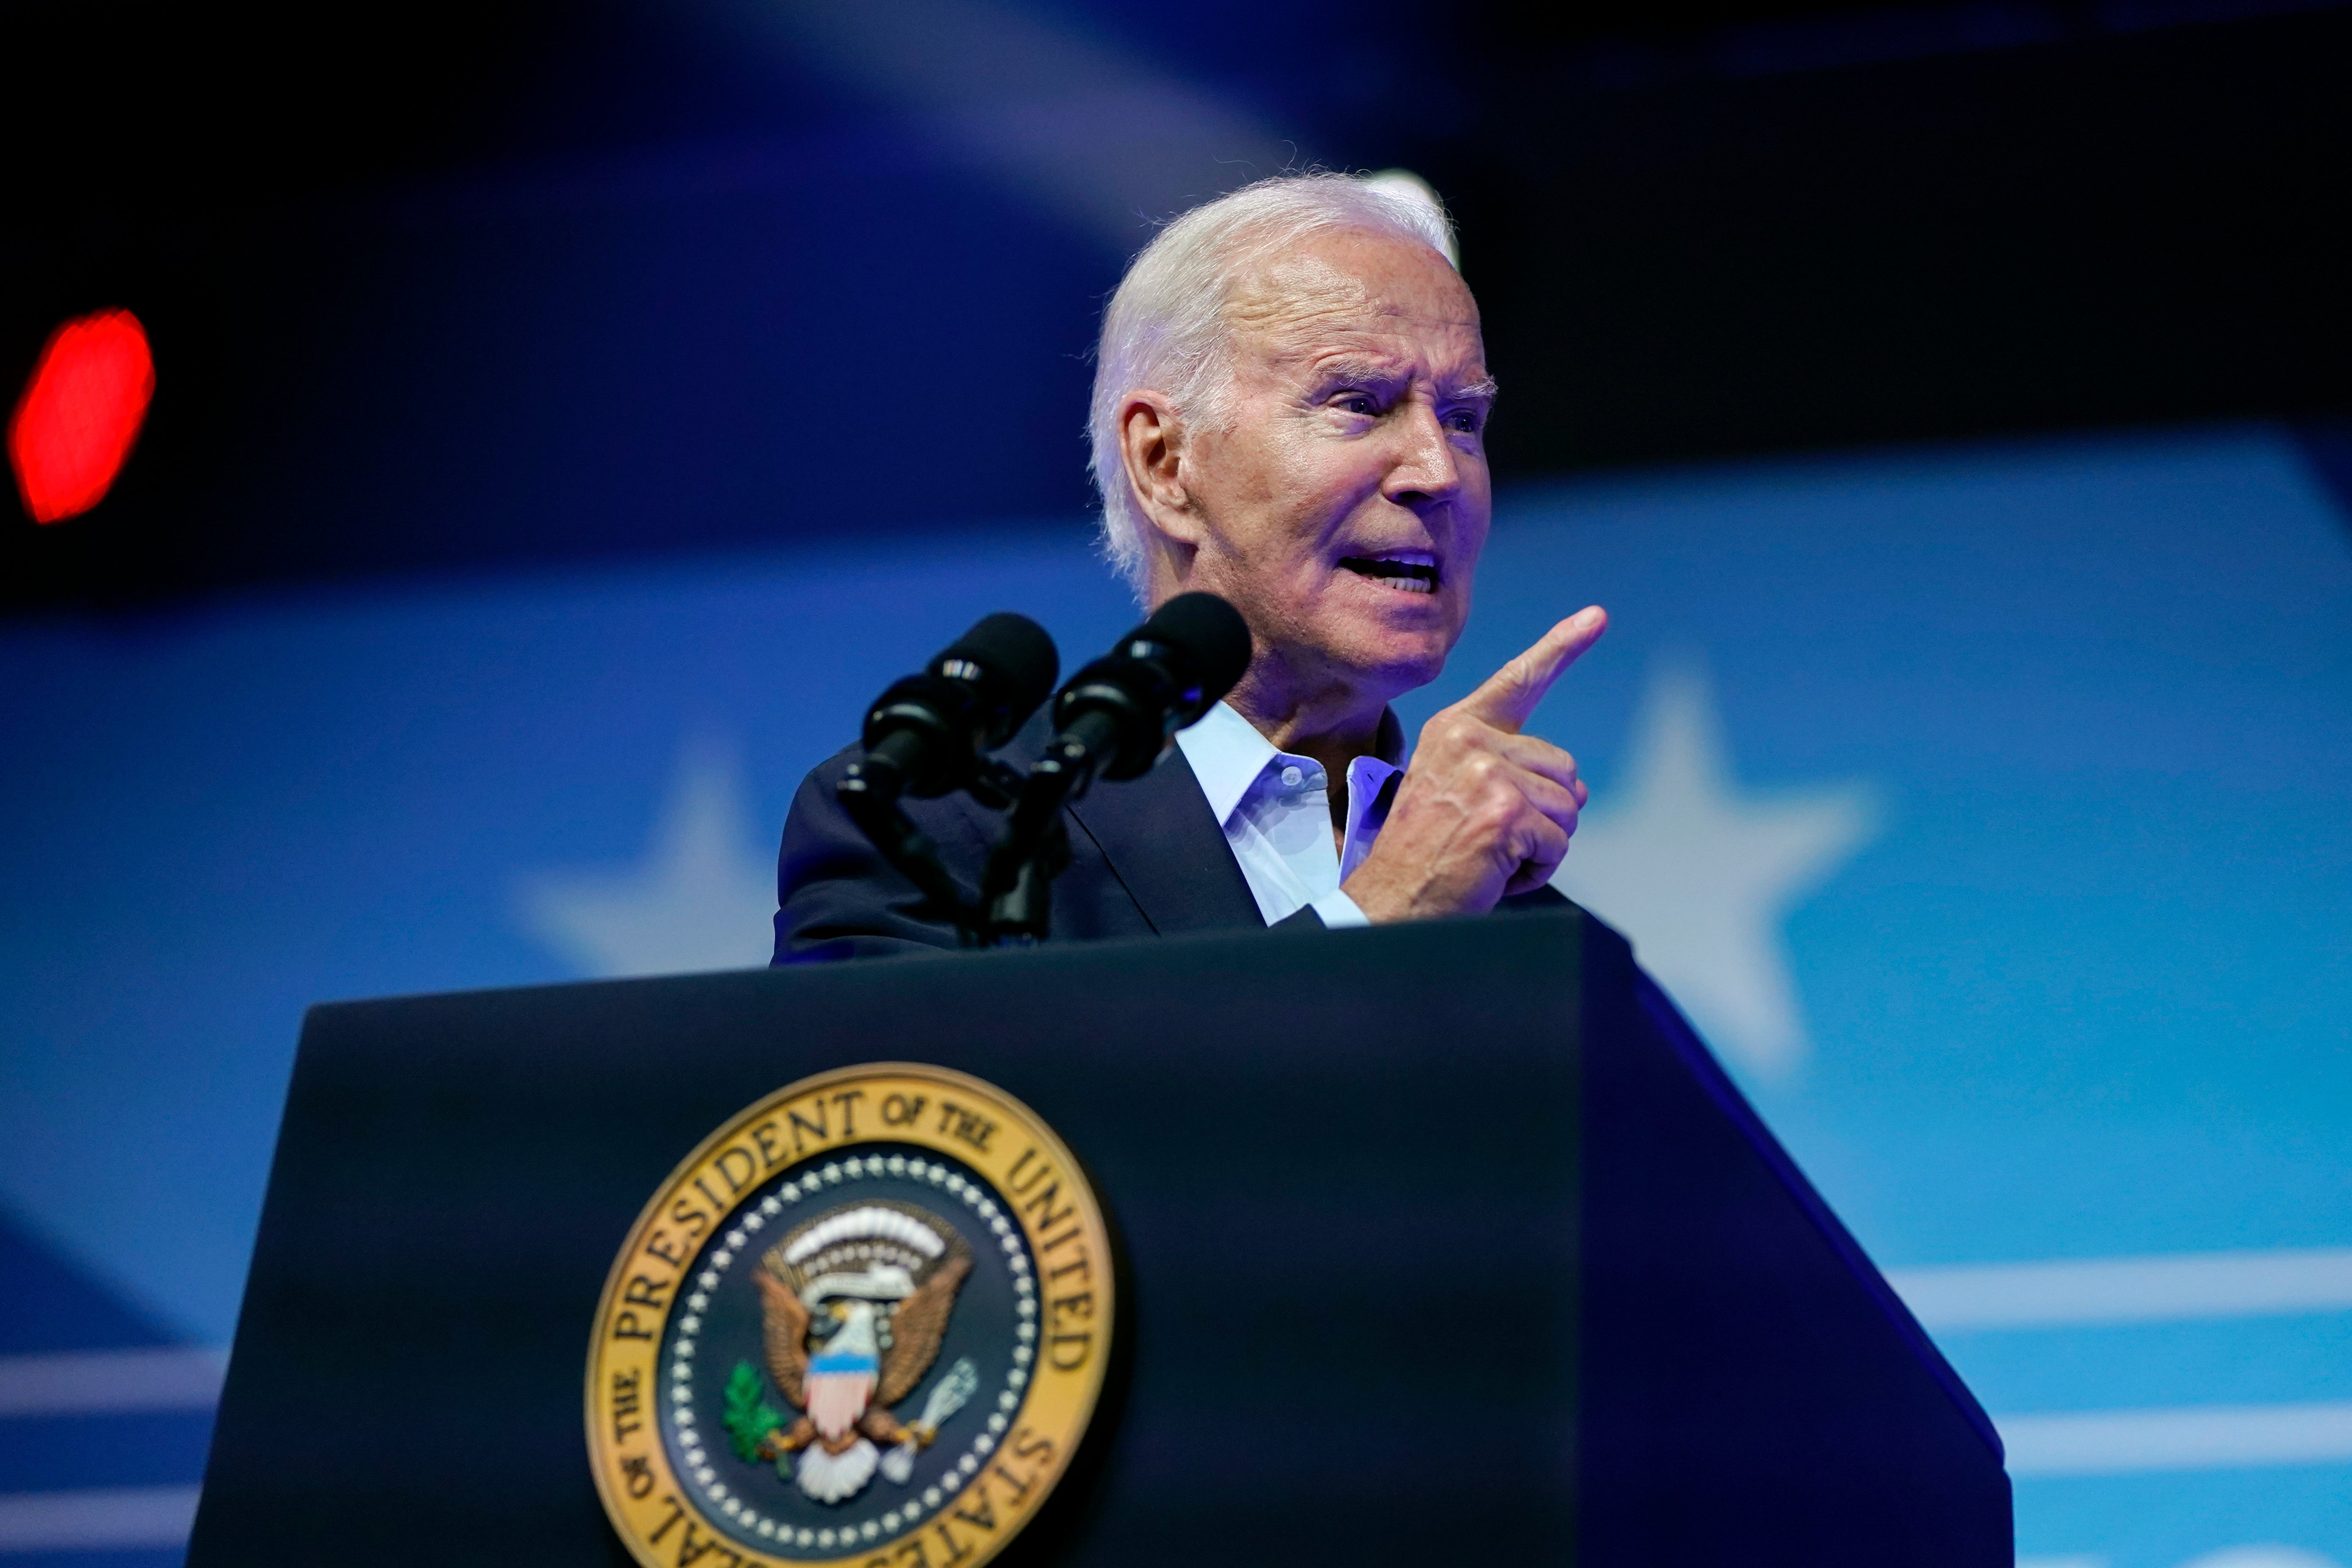 Biden said he wanted to rebuild the US economy ‘from the bottom up and middle out, not top down’